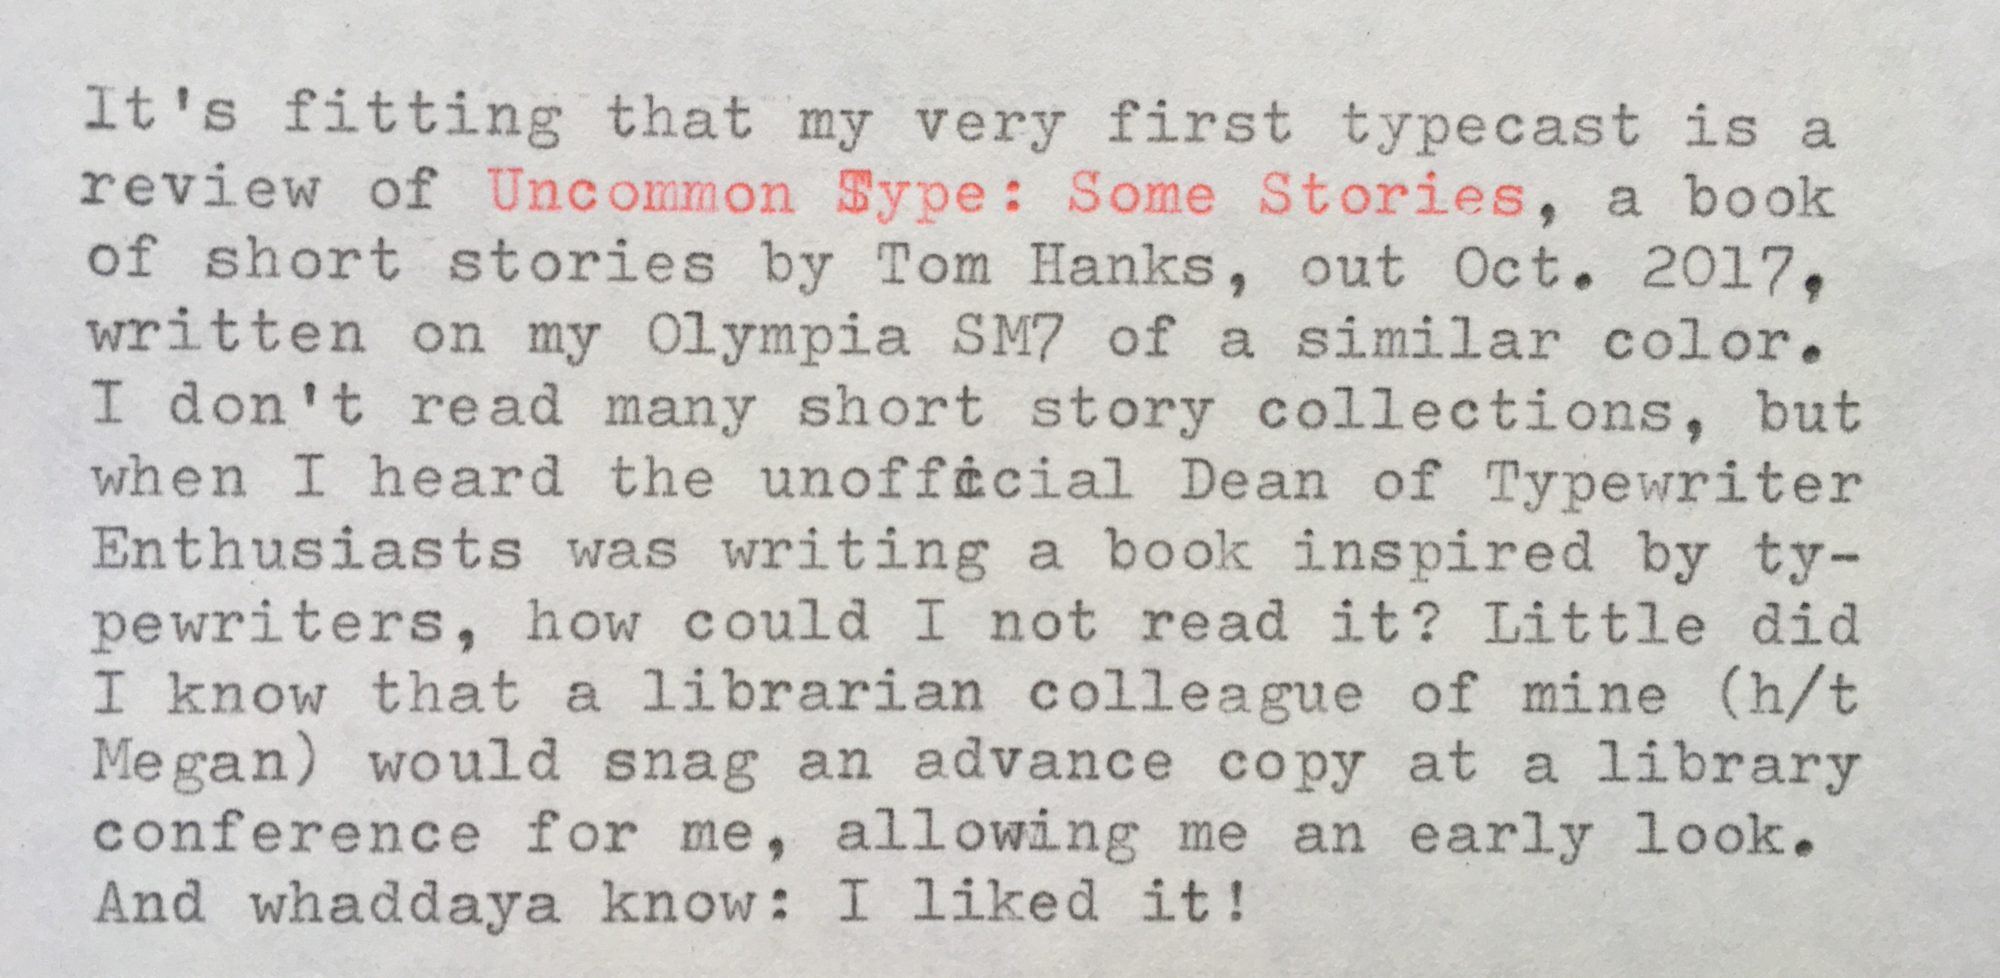 It's fitting that my very first typecast is a review of "Uncommon Type: Some Stories", a book of short stories by Tom Hanks (out October 2017), written on my Olympia SM7 of a similar color. I don't read many short story collections, but when I heard the unofficial Dean of Typewriter Enthusiasts was writing a book inspired by typewriters, how could I not read it? Little did I know that a librarian colleague (h/t Megan) would snag an advance copy at a library conference for me, allowing me an early look. And whaddaya know: I liked it! But I *would* say that, right? "Of course the typewriter and Tom Hanks fan would like it!" Since I knew I was biased, I tried to read the book as if I'd picked it up at random without knowing its very famous author. And I liked it even then, though there are clues throughout that point to Hanks being the author. There are stories about World War II, the Apollo missions, and the life of a famous actor during a whirlwind press junket, no doubt influenced by Hanks' well-known interests and career. The bulk of the writing, though, is characteristic of simply a good writer, famous or otherwise. The highlight might be "Christmas Eve 1953", which alternates between a sweetly rendered scene of a World War II vet at home with his family and his vivid flashbacks to the Battle of the Bulge. I also really enjoyed "The Past is Important to Us", set in the near-future when time travel is possible but only to a specific time and place for 22 hours at a time. This brings a billionaire to the 1939 New York World's Fair repeatedly to track down an enchanting mystery woman. Has the makings of a great short film. Several stories feature the same friend group but with a different focus in each: "Three Exhausting Weeks" follows a listless man who gets more than he bargained for when he starts dating his type-A friend; "Alan Bean Plus Four" (so-named for the fourth person to walk on the moon) sends the gang on a fantastical, slapdash trip around the Moon; and "Steve Wong is Perfect" has them cheering on a reluctant bowling prodigy. Each story leads off with a picture of the typewriter mentioned in the story, be it a Hammond Type-o-Matic, Groma Kolibri, or Selectric. Most of them are used or mentioned only in passing (for a story dedicated exclusively to typewriters, typeheads can skip to the delightful "These Are the Meditations of My Heart", which includes a paean to the Hermes 2000), so people who didn't come to the book for the typewriters (perish the thought!) will still enjoy a fairly diverse assemblage of stories and characters. Perhaps it shouldn't be surprising that Hanks exhibits in his writing an actor's keen sense of relationships and scenic flow. It *was* surprising that this wasn't the case for dialogue, which is often over-written. But I ain't mad. I'd recommend this not only as a typewriter fan but as a librarian, to readers in search of small-dose stories that trigger a smile as often as a twinge of longing. May this book recruit ever more people into the glorious Typewriter Revolution!